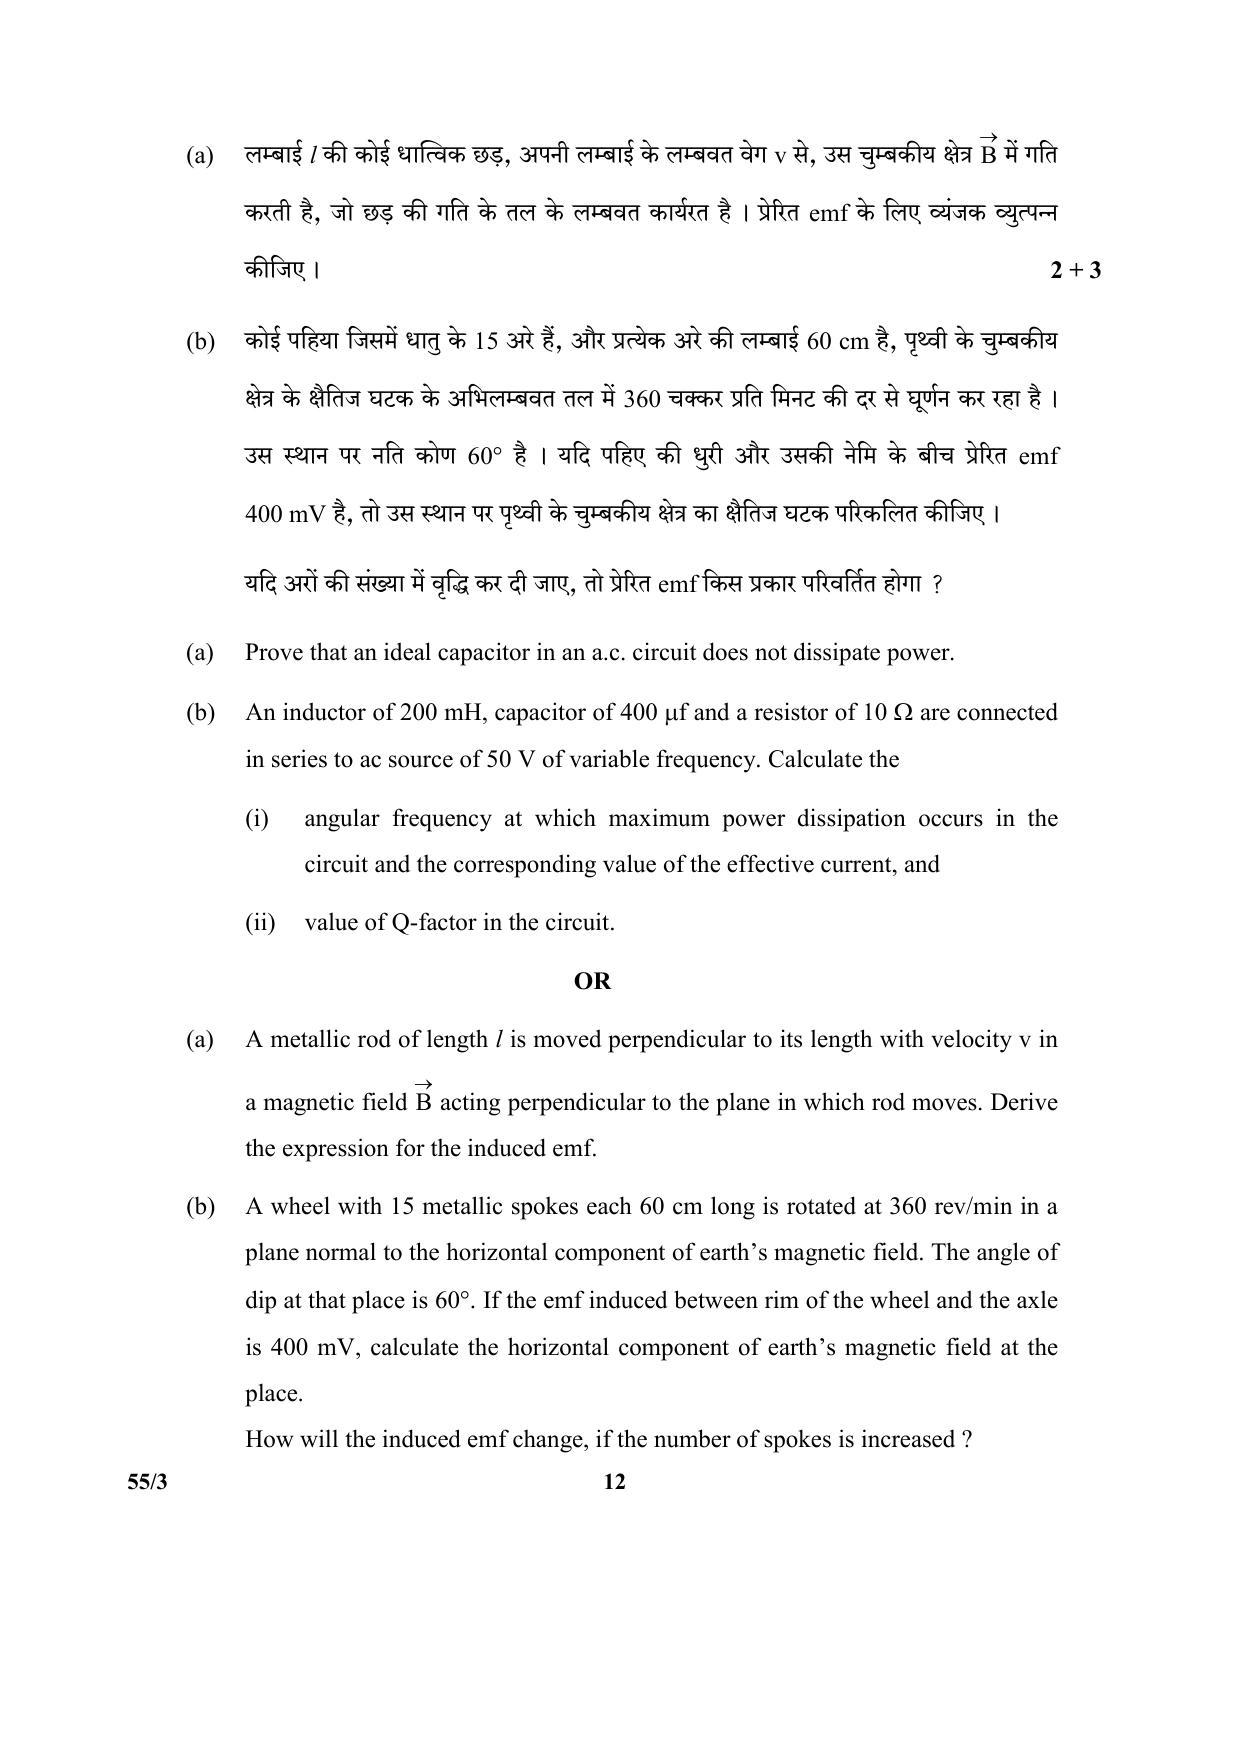 CBSE Class 12 55-3 (Physics) 2017-comptt Question Paper - Page 12